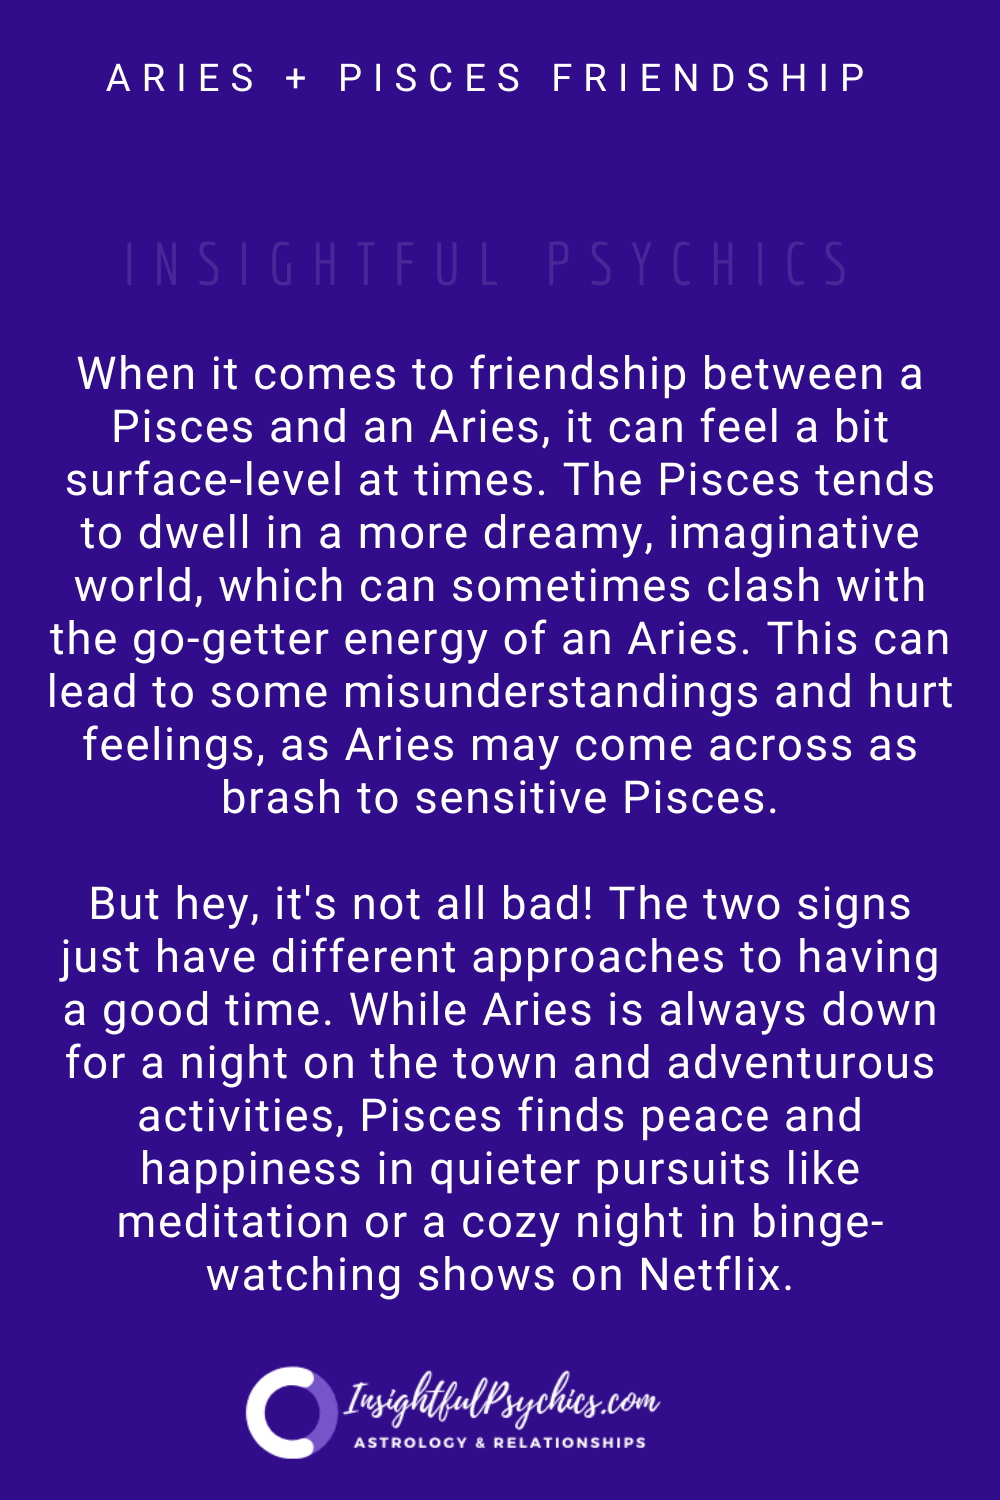 pisces and aries friendship